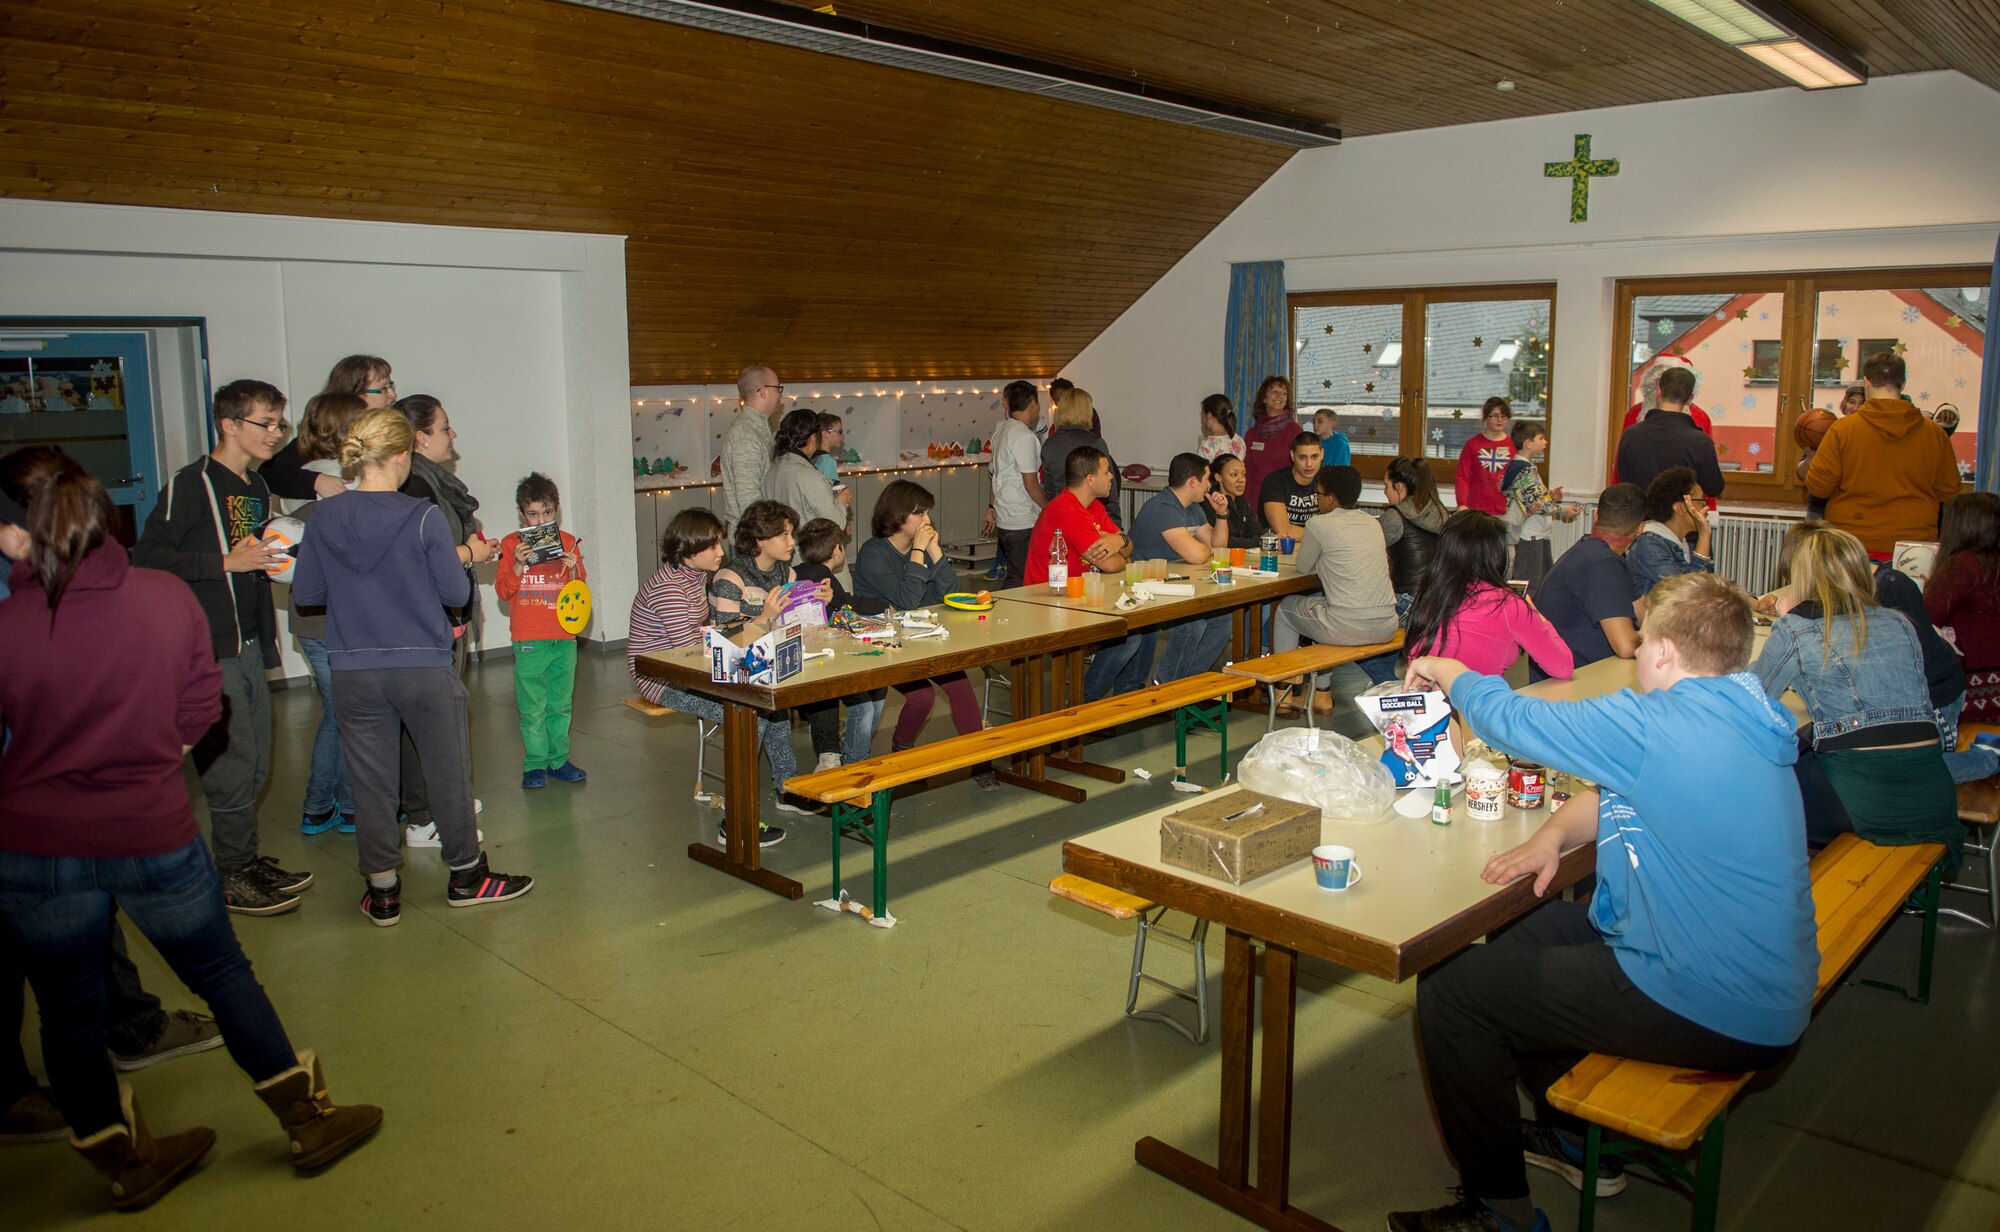 First Four volunteers from the 52nd Fighter Wing and St. Vinzenzhaus residents participate in a holiday party at the institution of child and youth services in Speicher, Germany, Dec. 13, 2015. Spangdahlem Air Base’s First Four volunteers coordinated an arts-and-craft activity booth and designed cookies with the residents. (U.S. Air Force photo by Airman 1st Class Timothy Kim/Released)